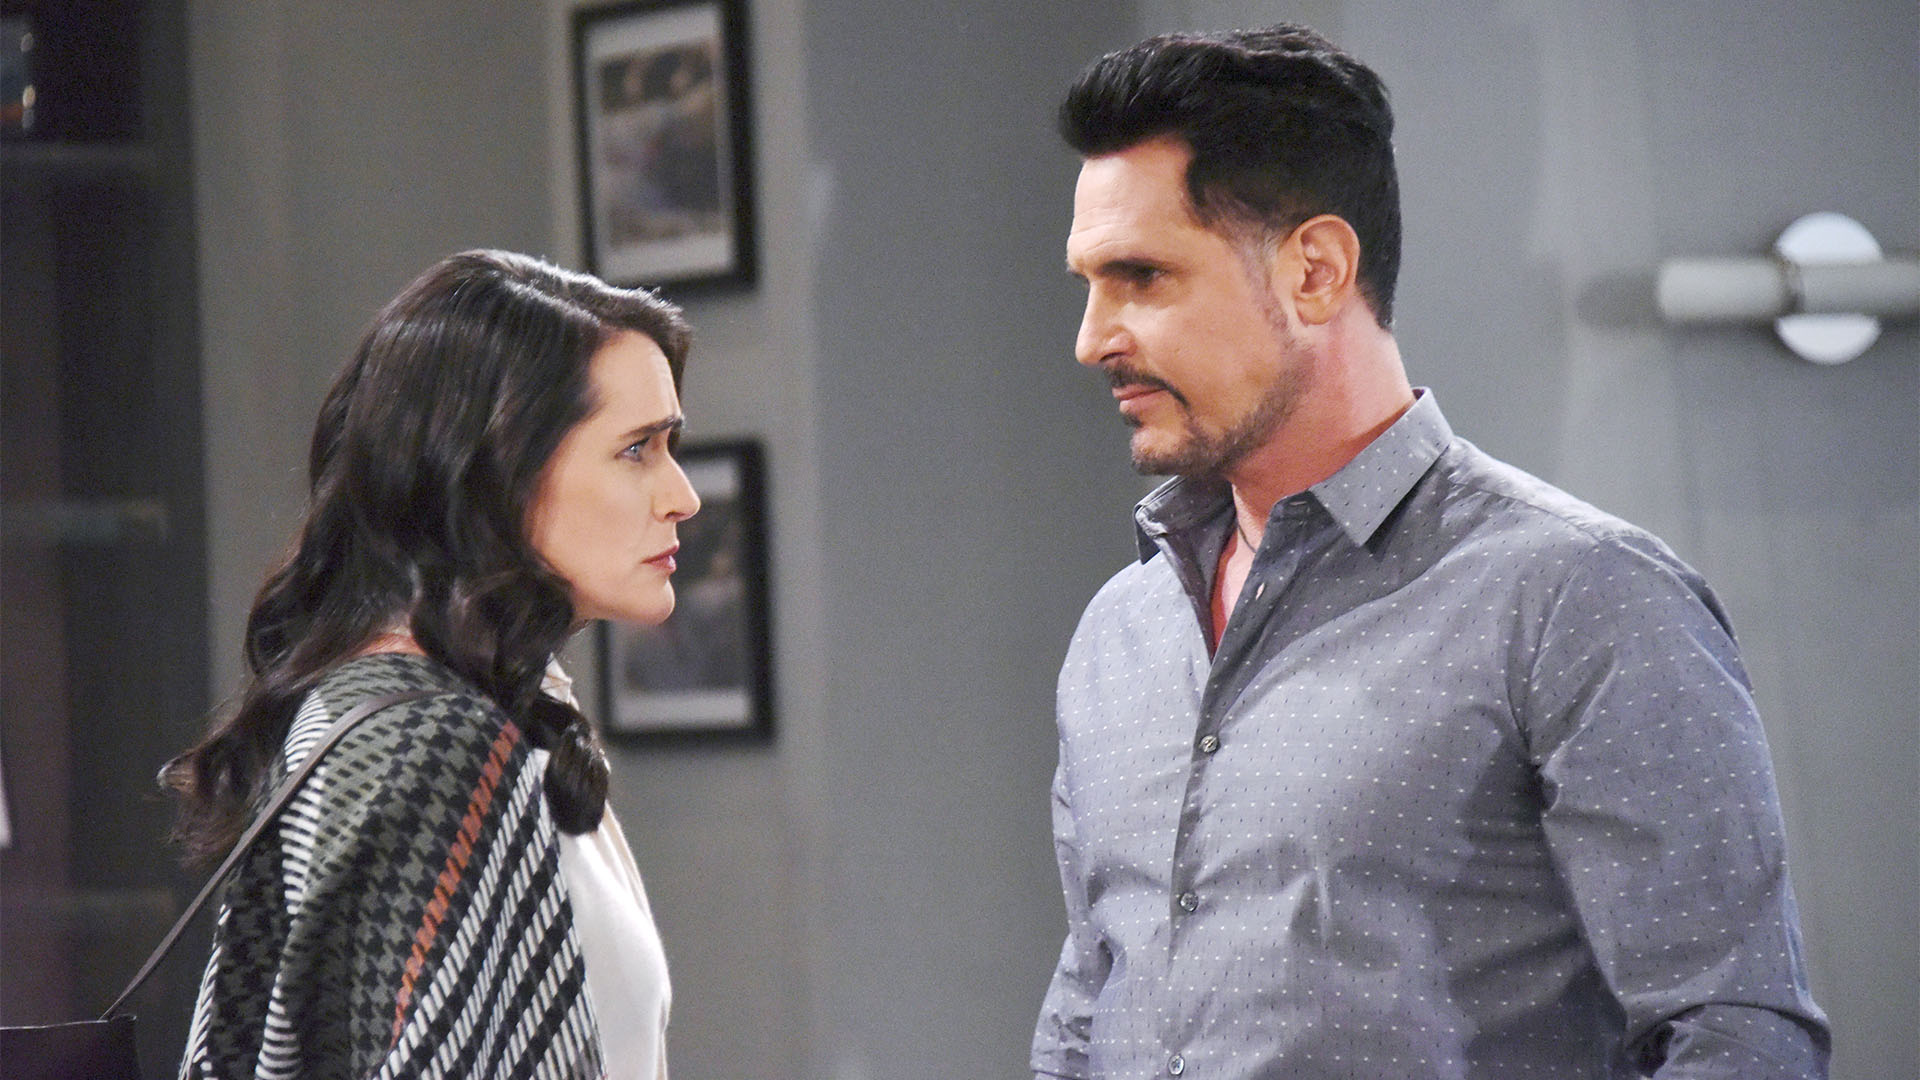 Quinn's dark side surfaces as she goes into protective mode of Wyatt against Bill.